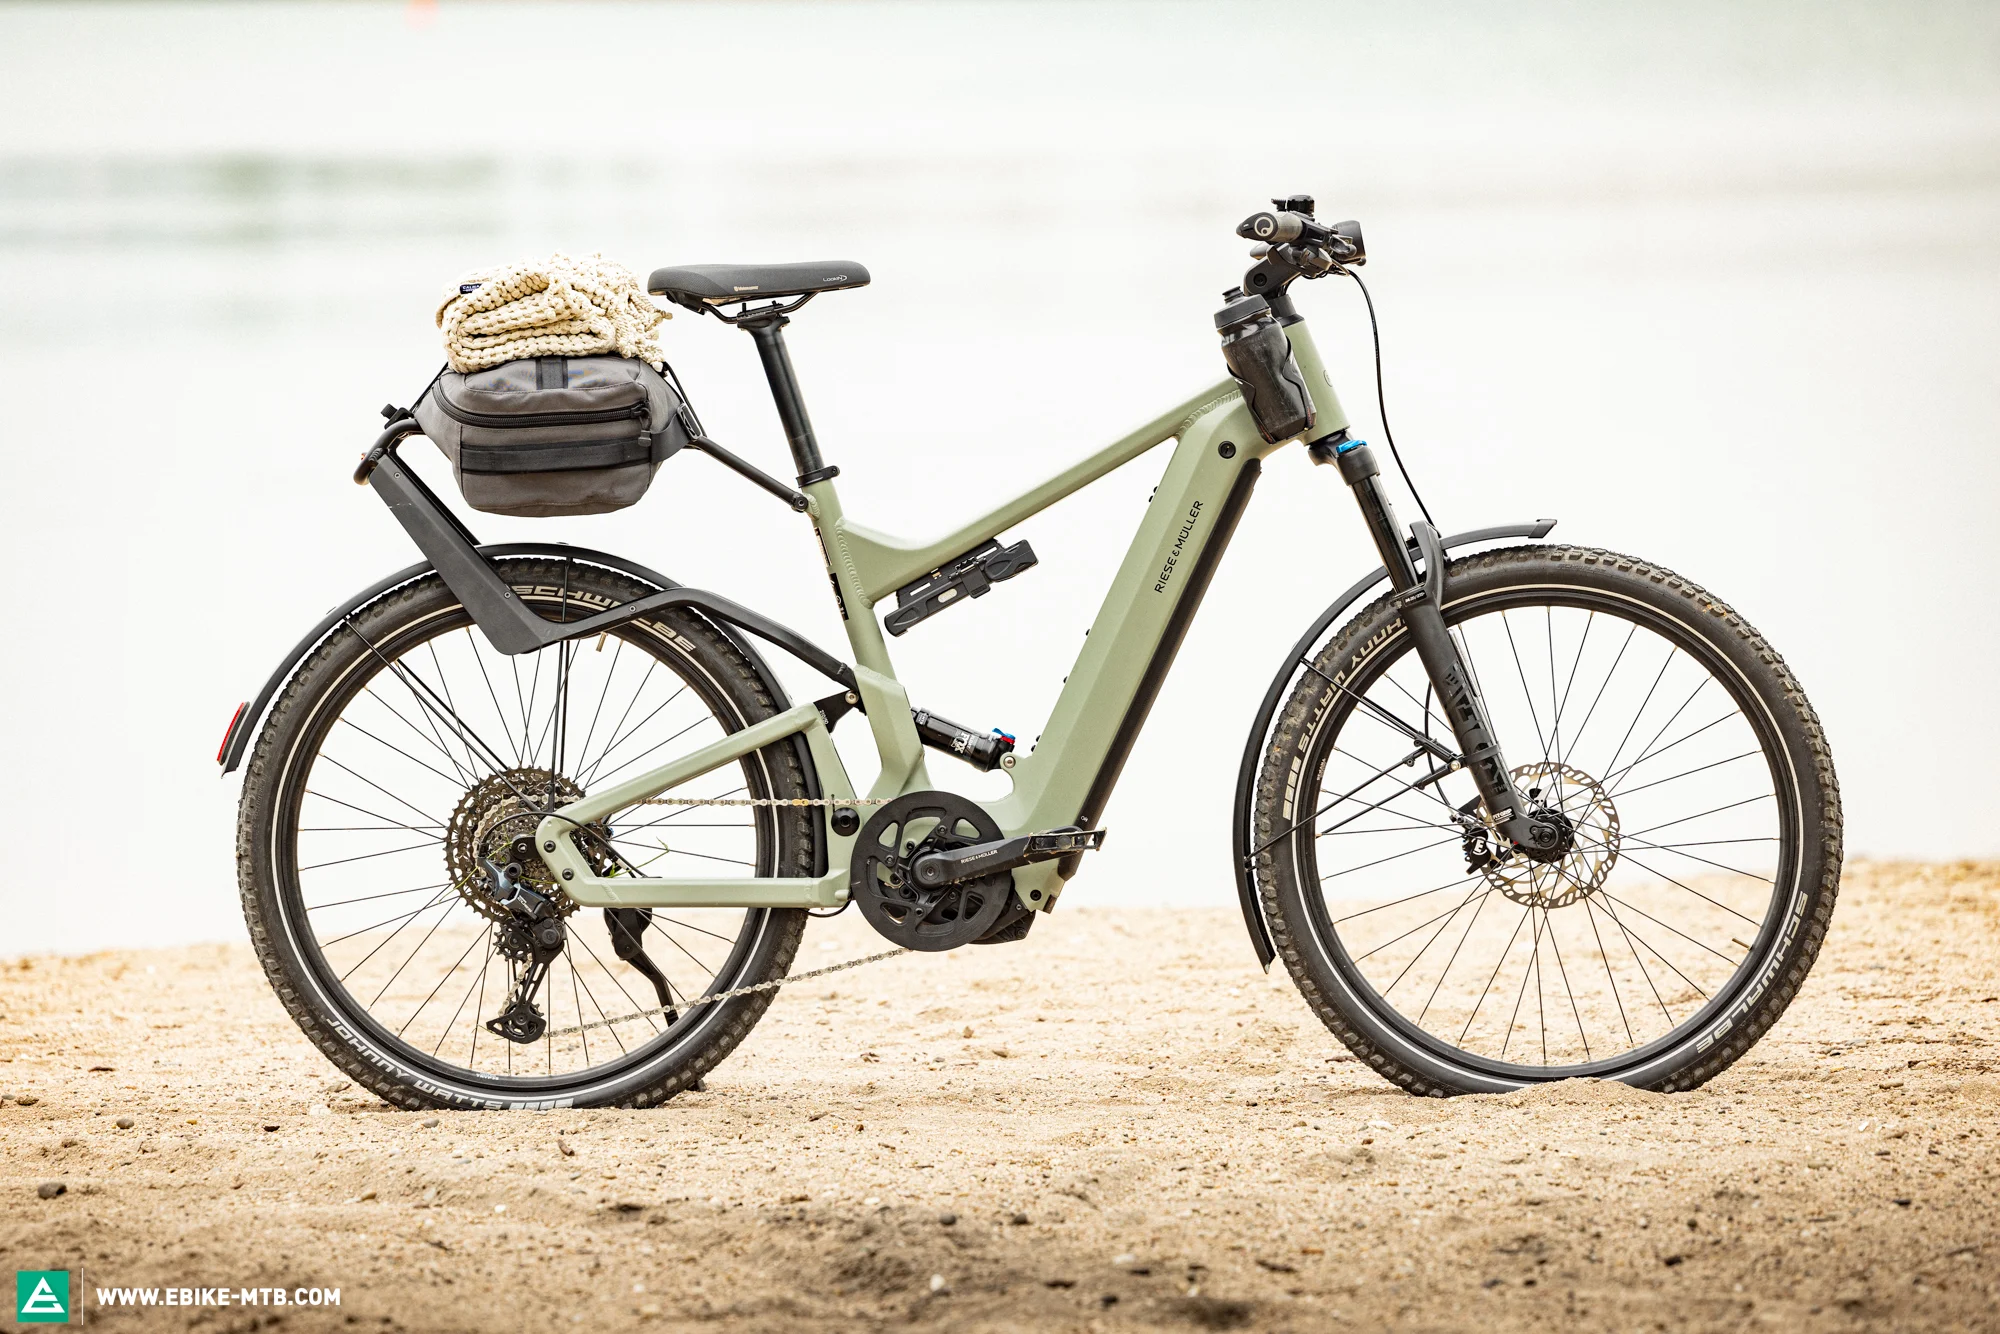 The Riese & Müller Delite 4 GT Touring on test for best SUV ebike 2024 –  The real eSUV?